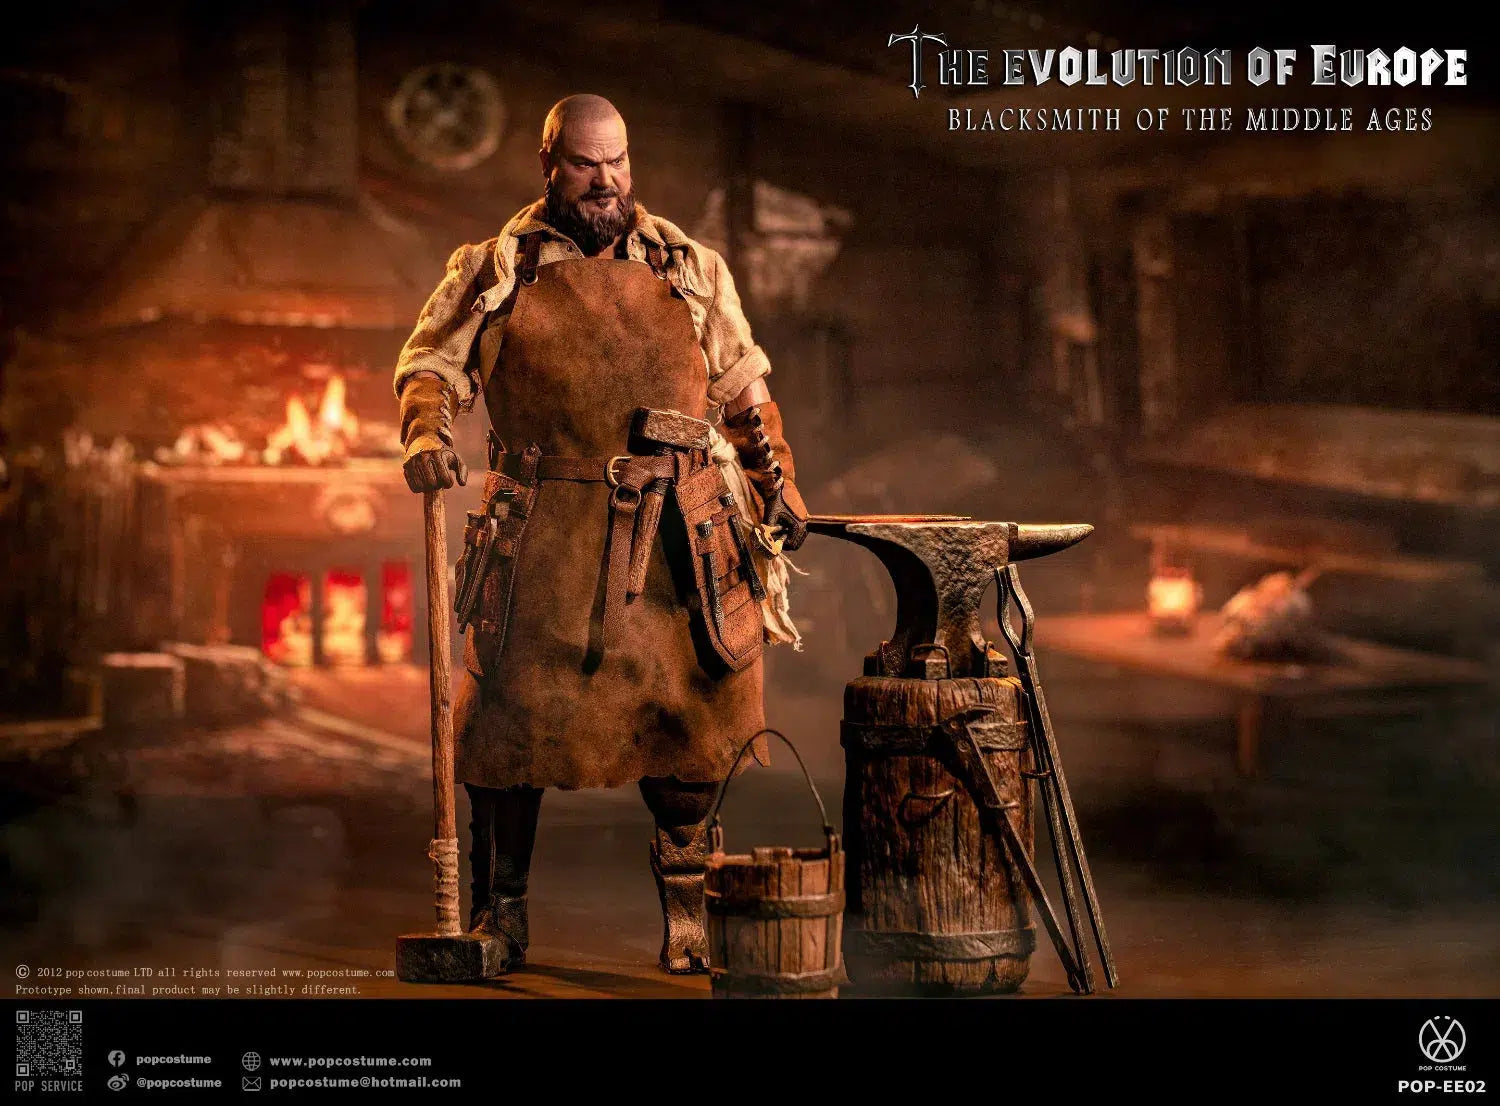 The Evolution of Europe: Blacksmith Of The Middle Ages: POP-EE02: Pop Costume: Sixth Scale Figure: Pop Costume